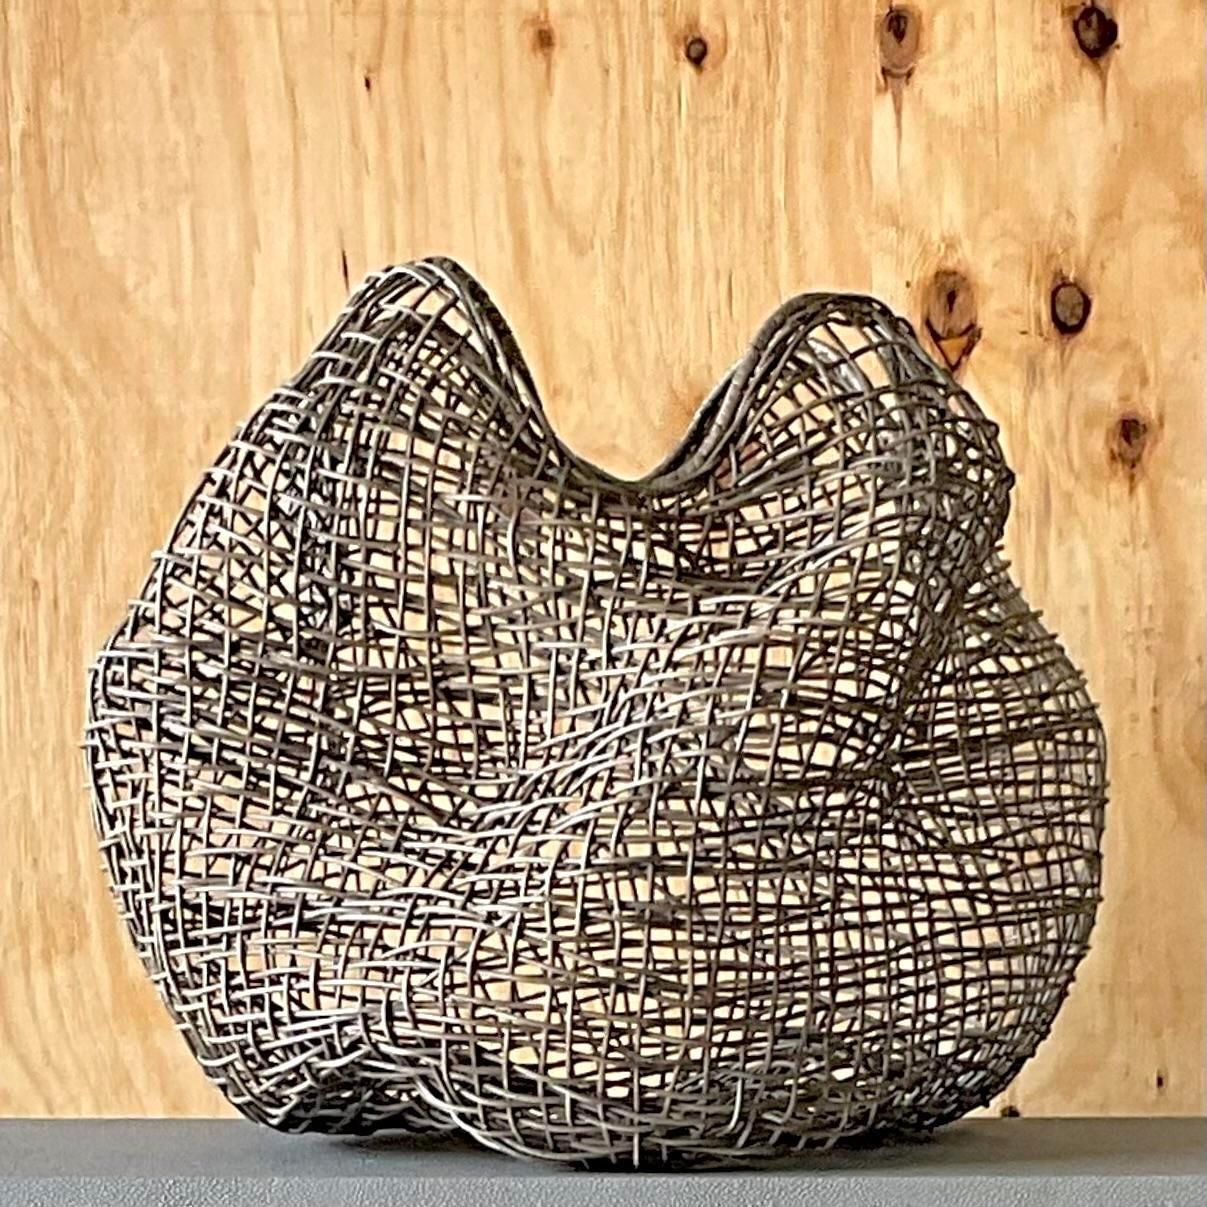 A fabulous vintage Coastal woven biomorphic basket. Made by the Palecek group and named Andora. Acquired from a Palm Beach estate.